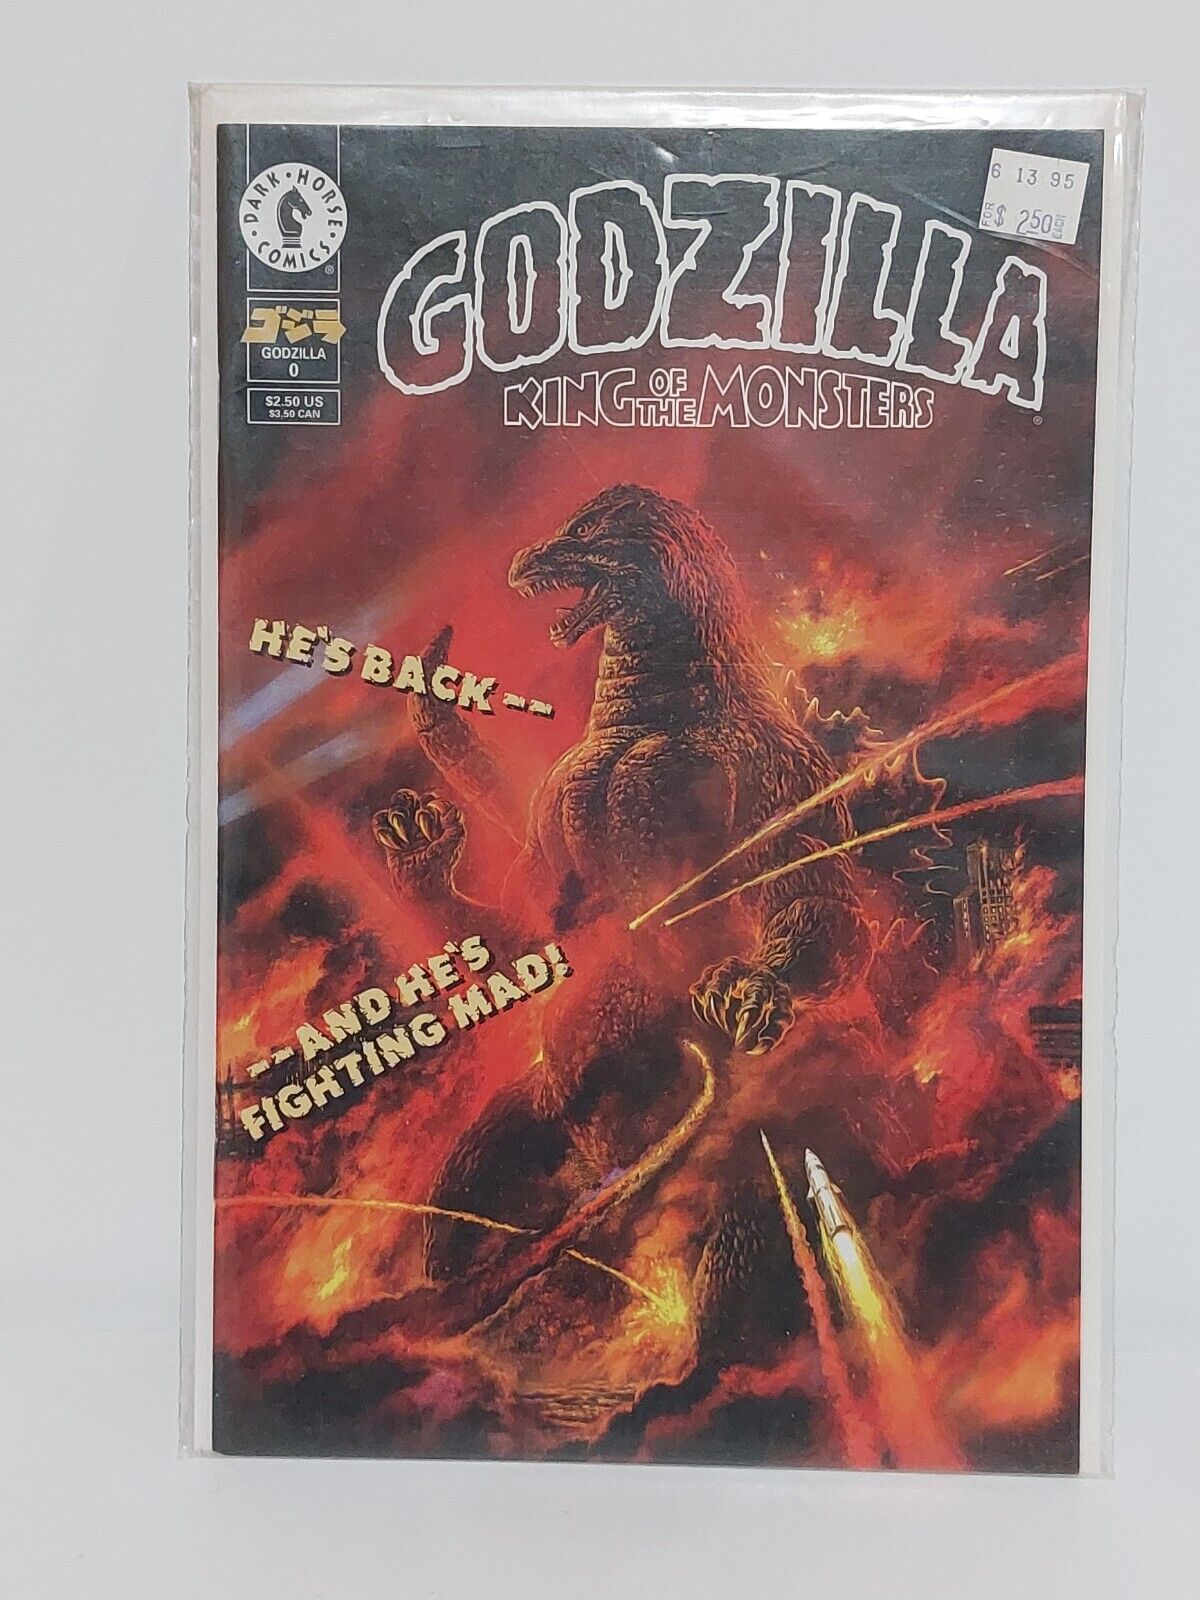 Vintage Godzilla King of the Monsters Dark Horse Comics Issue #0